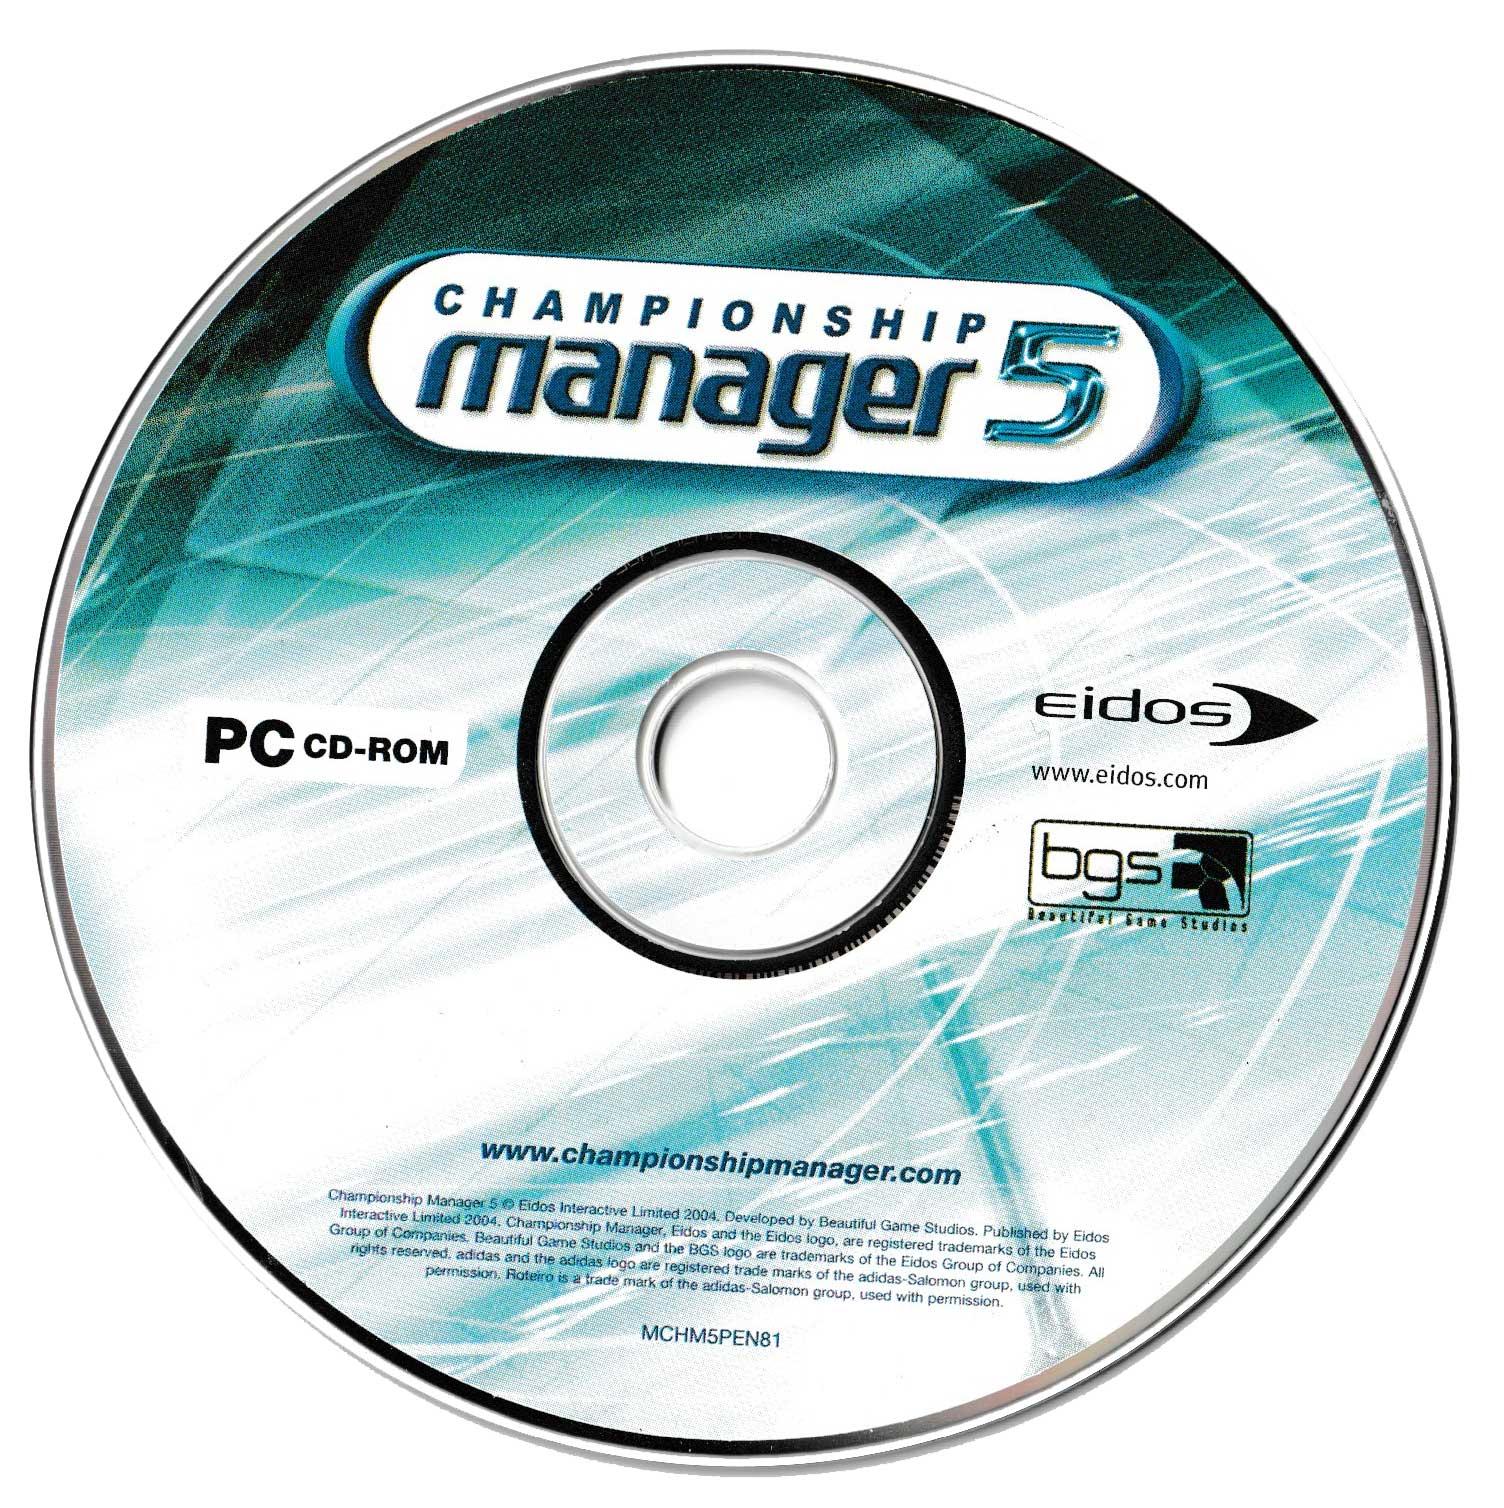 Championship Manager 5 - Classic Windows PC Game